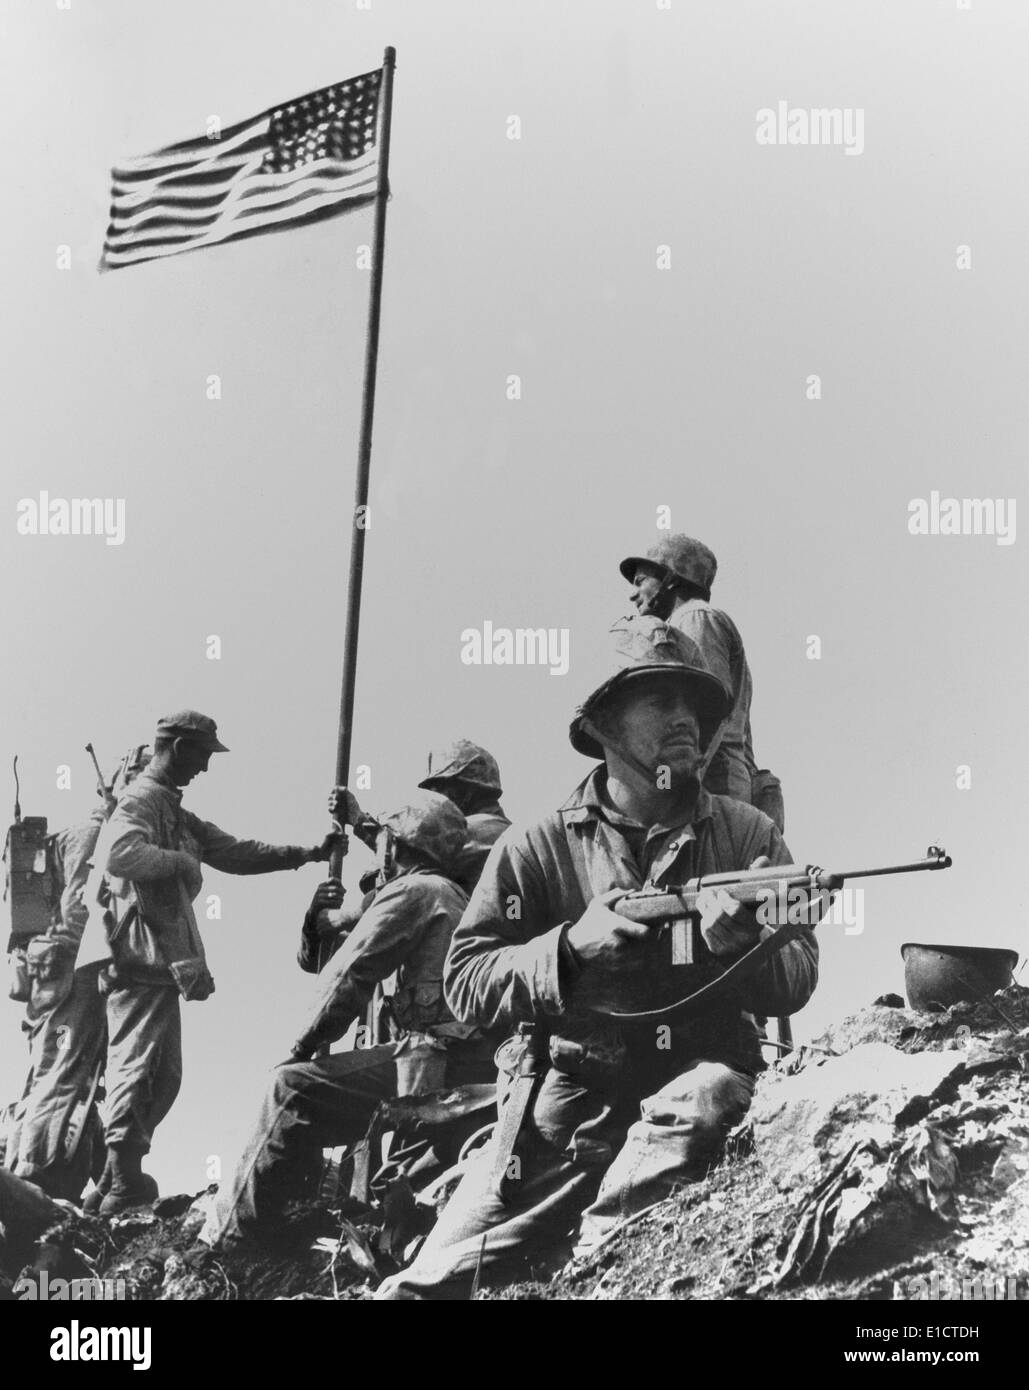 The first flag raising on Iwo Jima's Mount Suribachi, Feb. 23, 1945. A Marine guards the Fifth Division Marines of the 28th Stock Photo